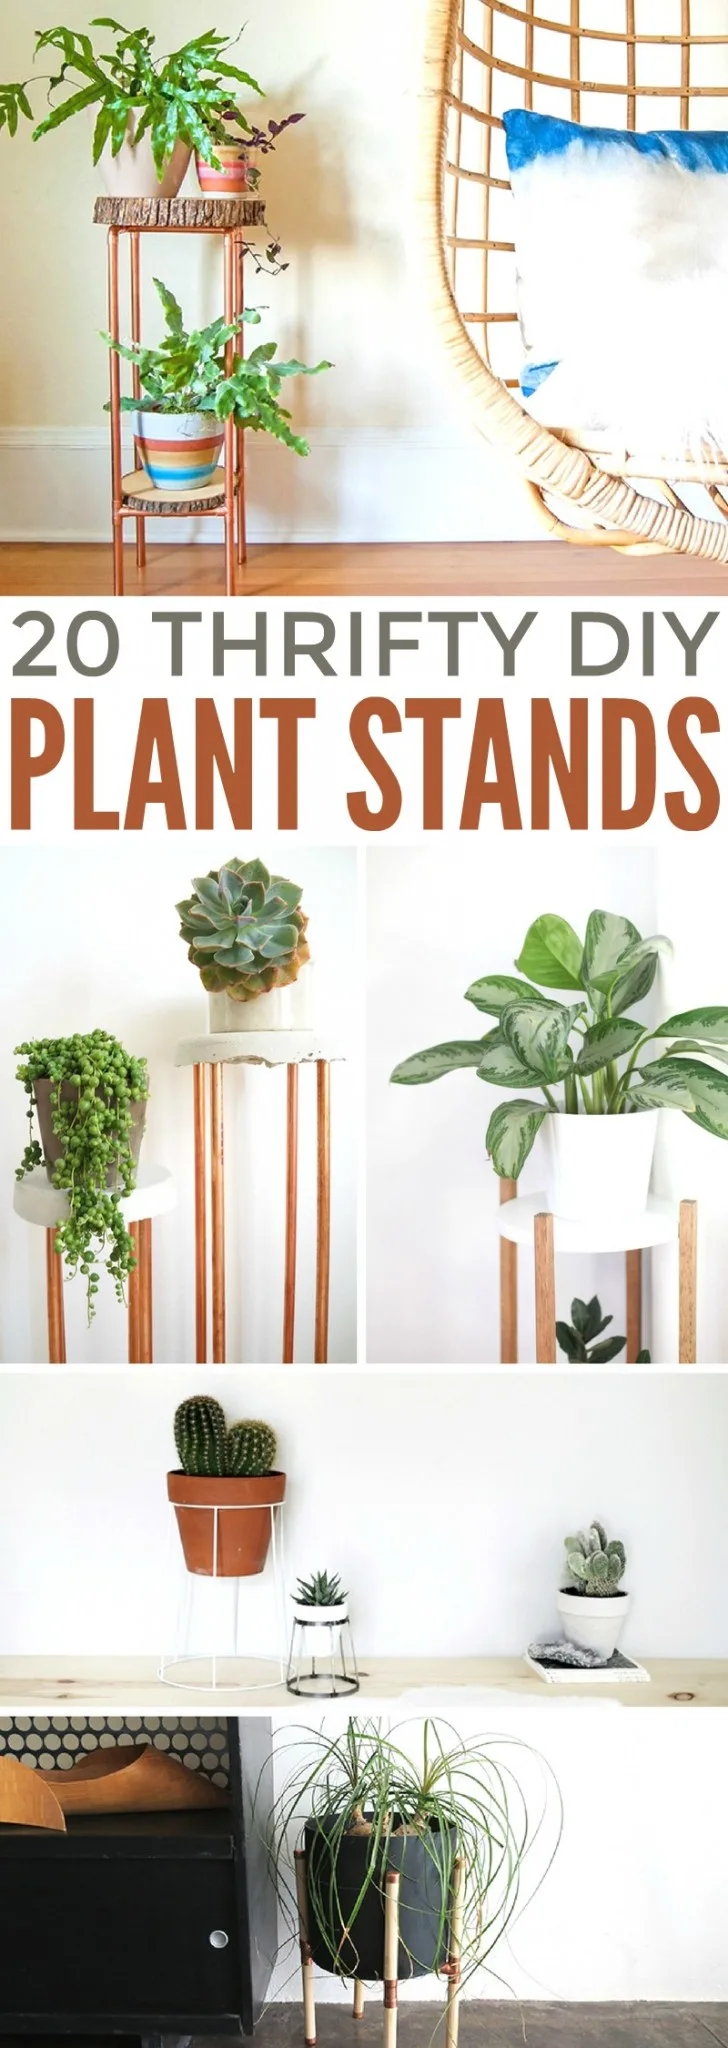 These 20 thrifty diy plant stands are very easy projects you can make yourself. I'm sharing some of my favourite DIY plant stands today, hoping these creative ideas will give you some inspiration for plant stands that stand out!